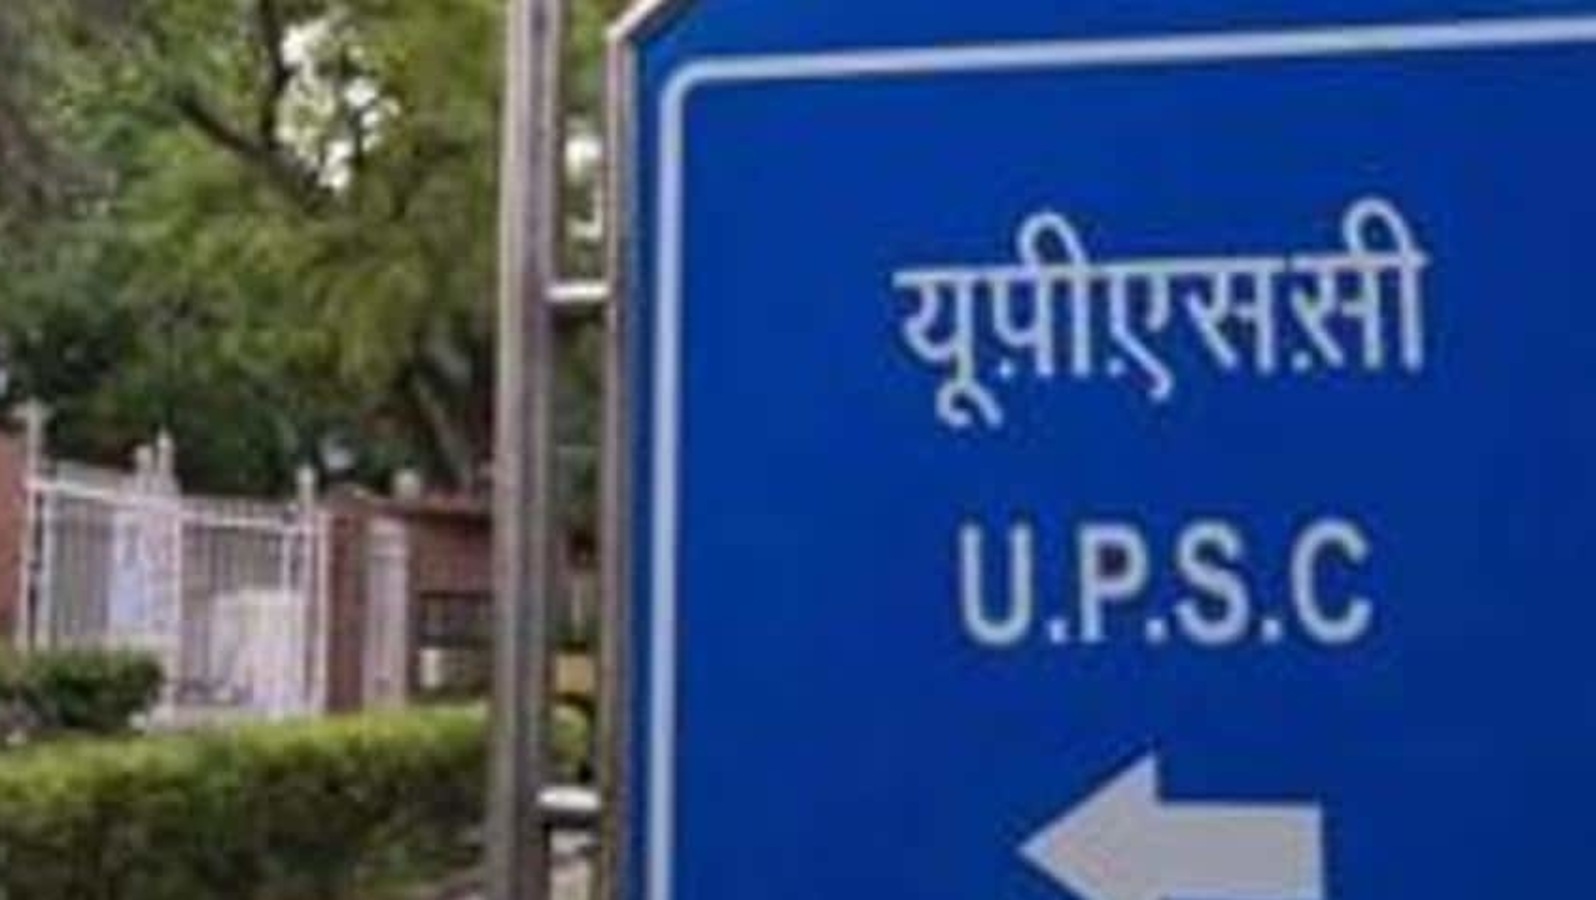 UPSC ESE Prelims Admit Card 2021 released, here’s direct link to download